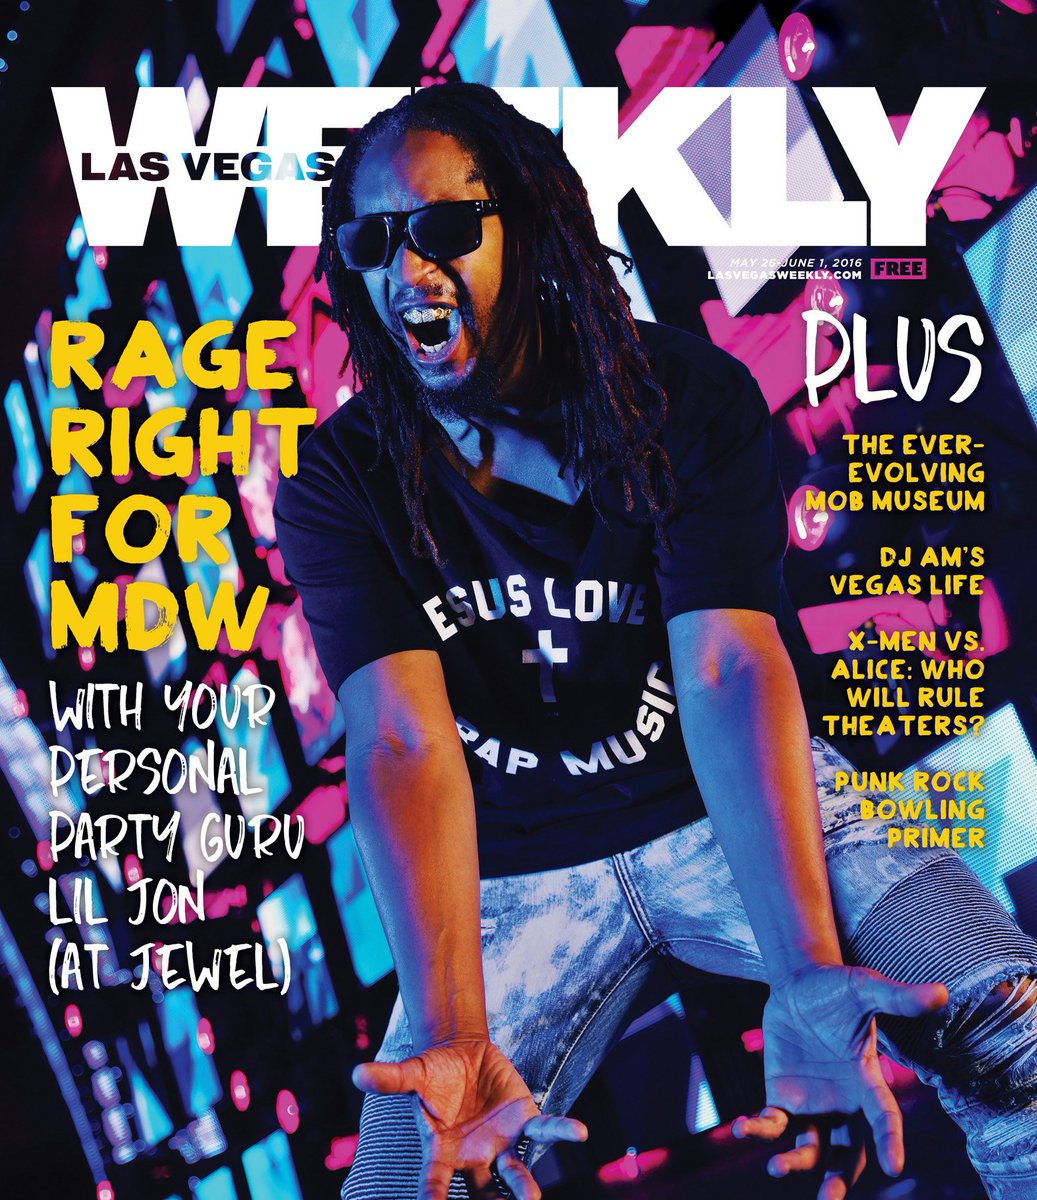 RT @lasvegasweekly: On this week's cover: Get party-ready for Vegas MDW with @LilJon at @jewellasvegas https://t.co/QkfNhjIk3K https://t.co…